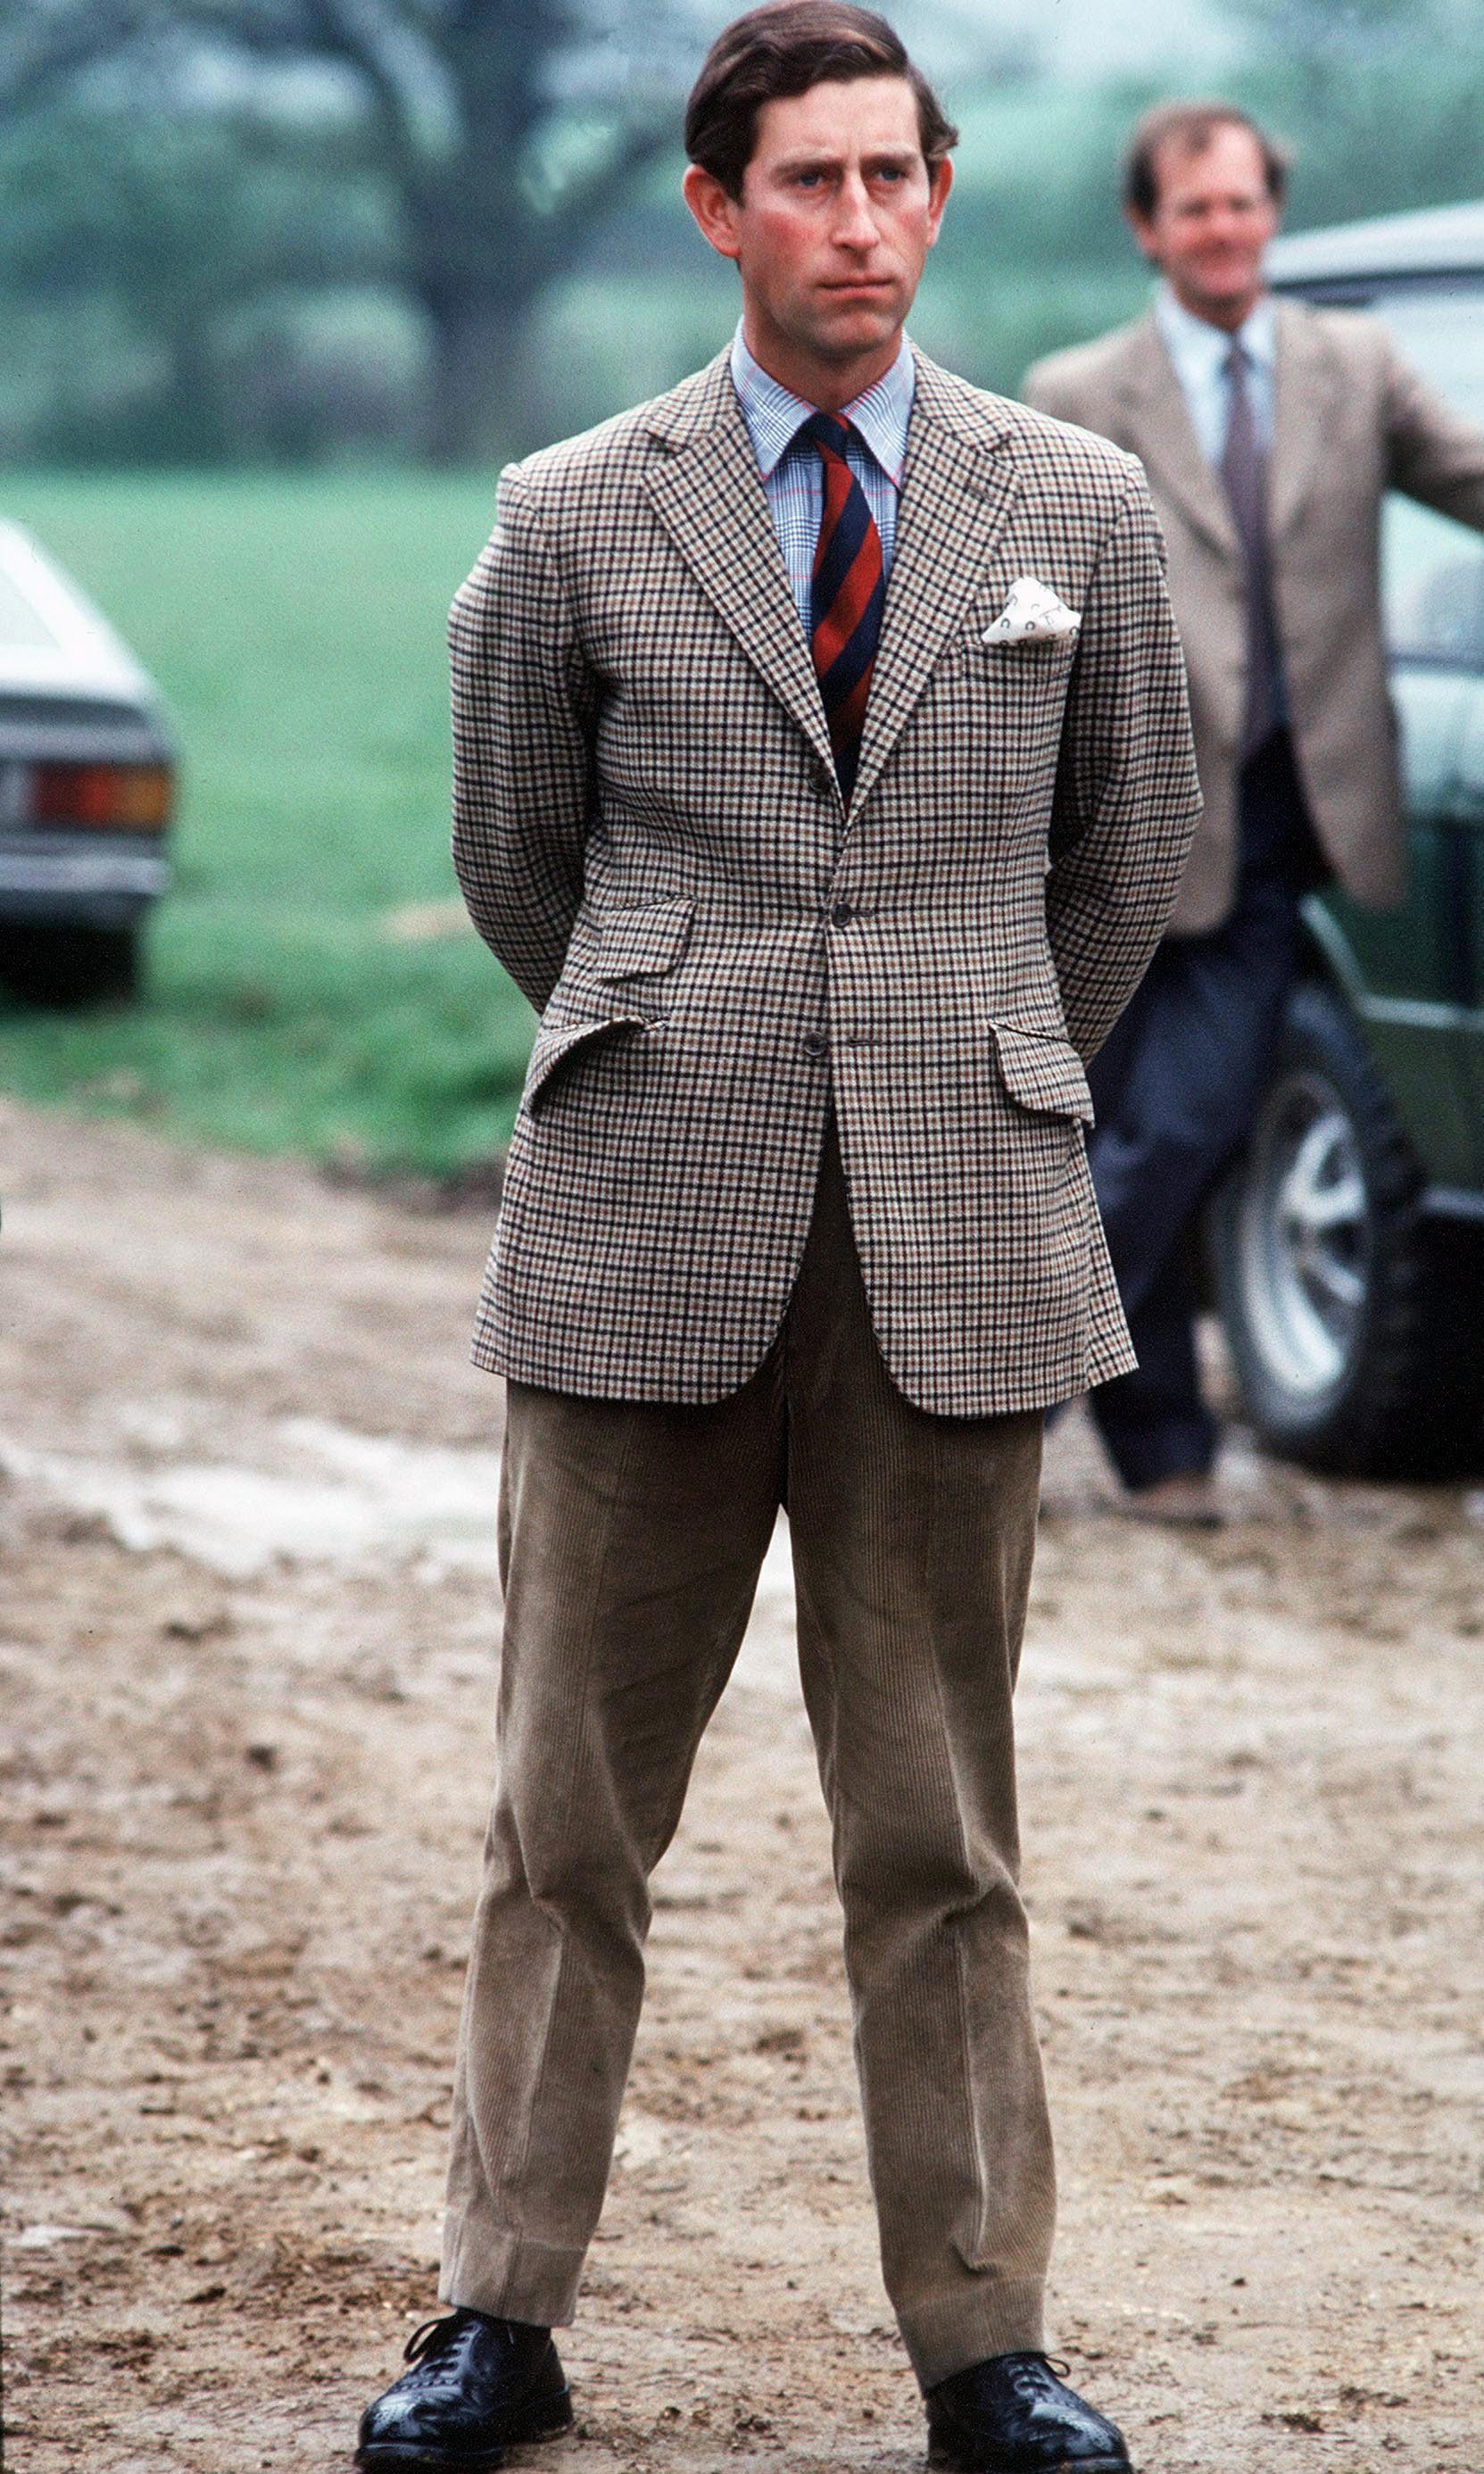 PRINCE CHARLES ATTENDING FLY FISHING COMPETITION, WINDSOR GR